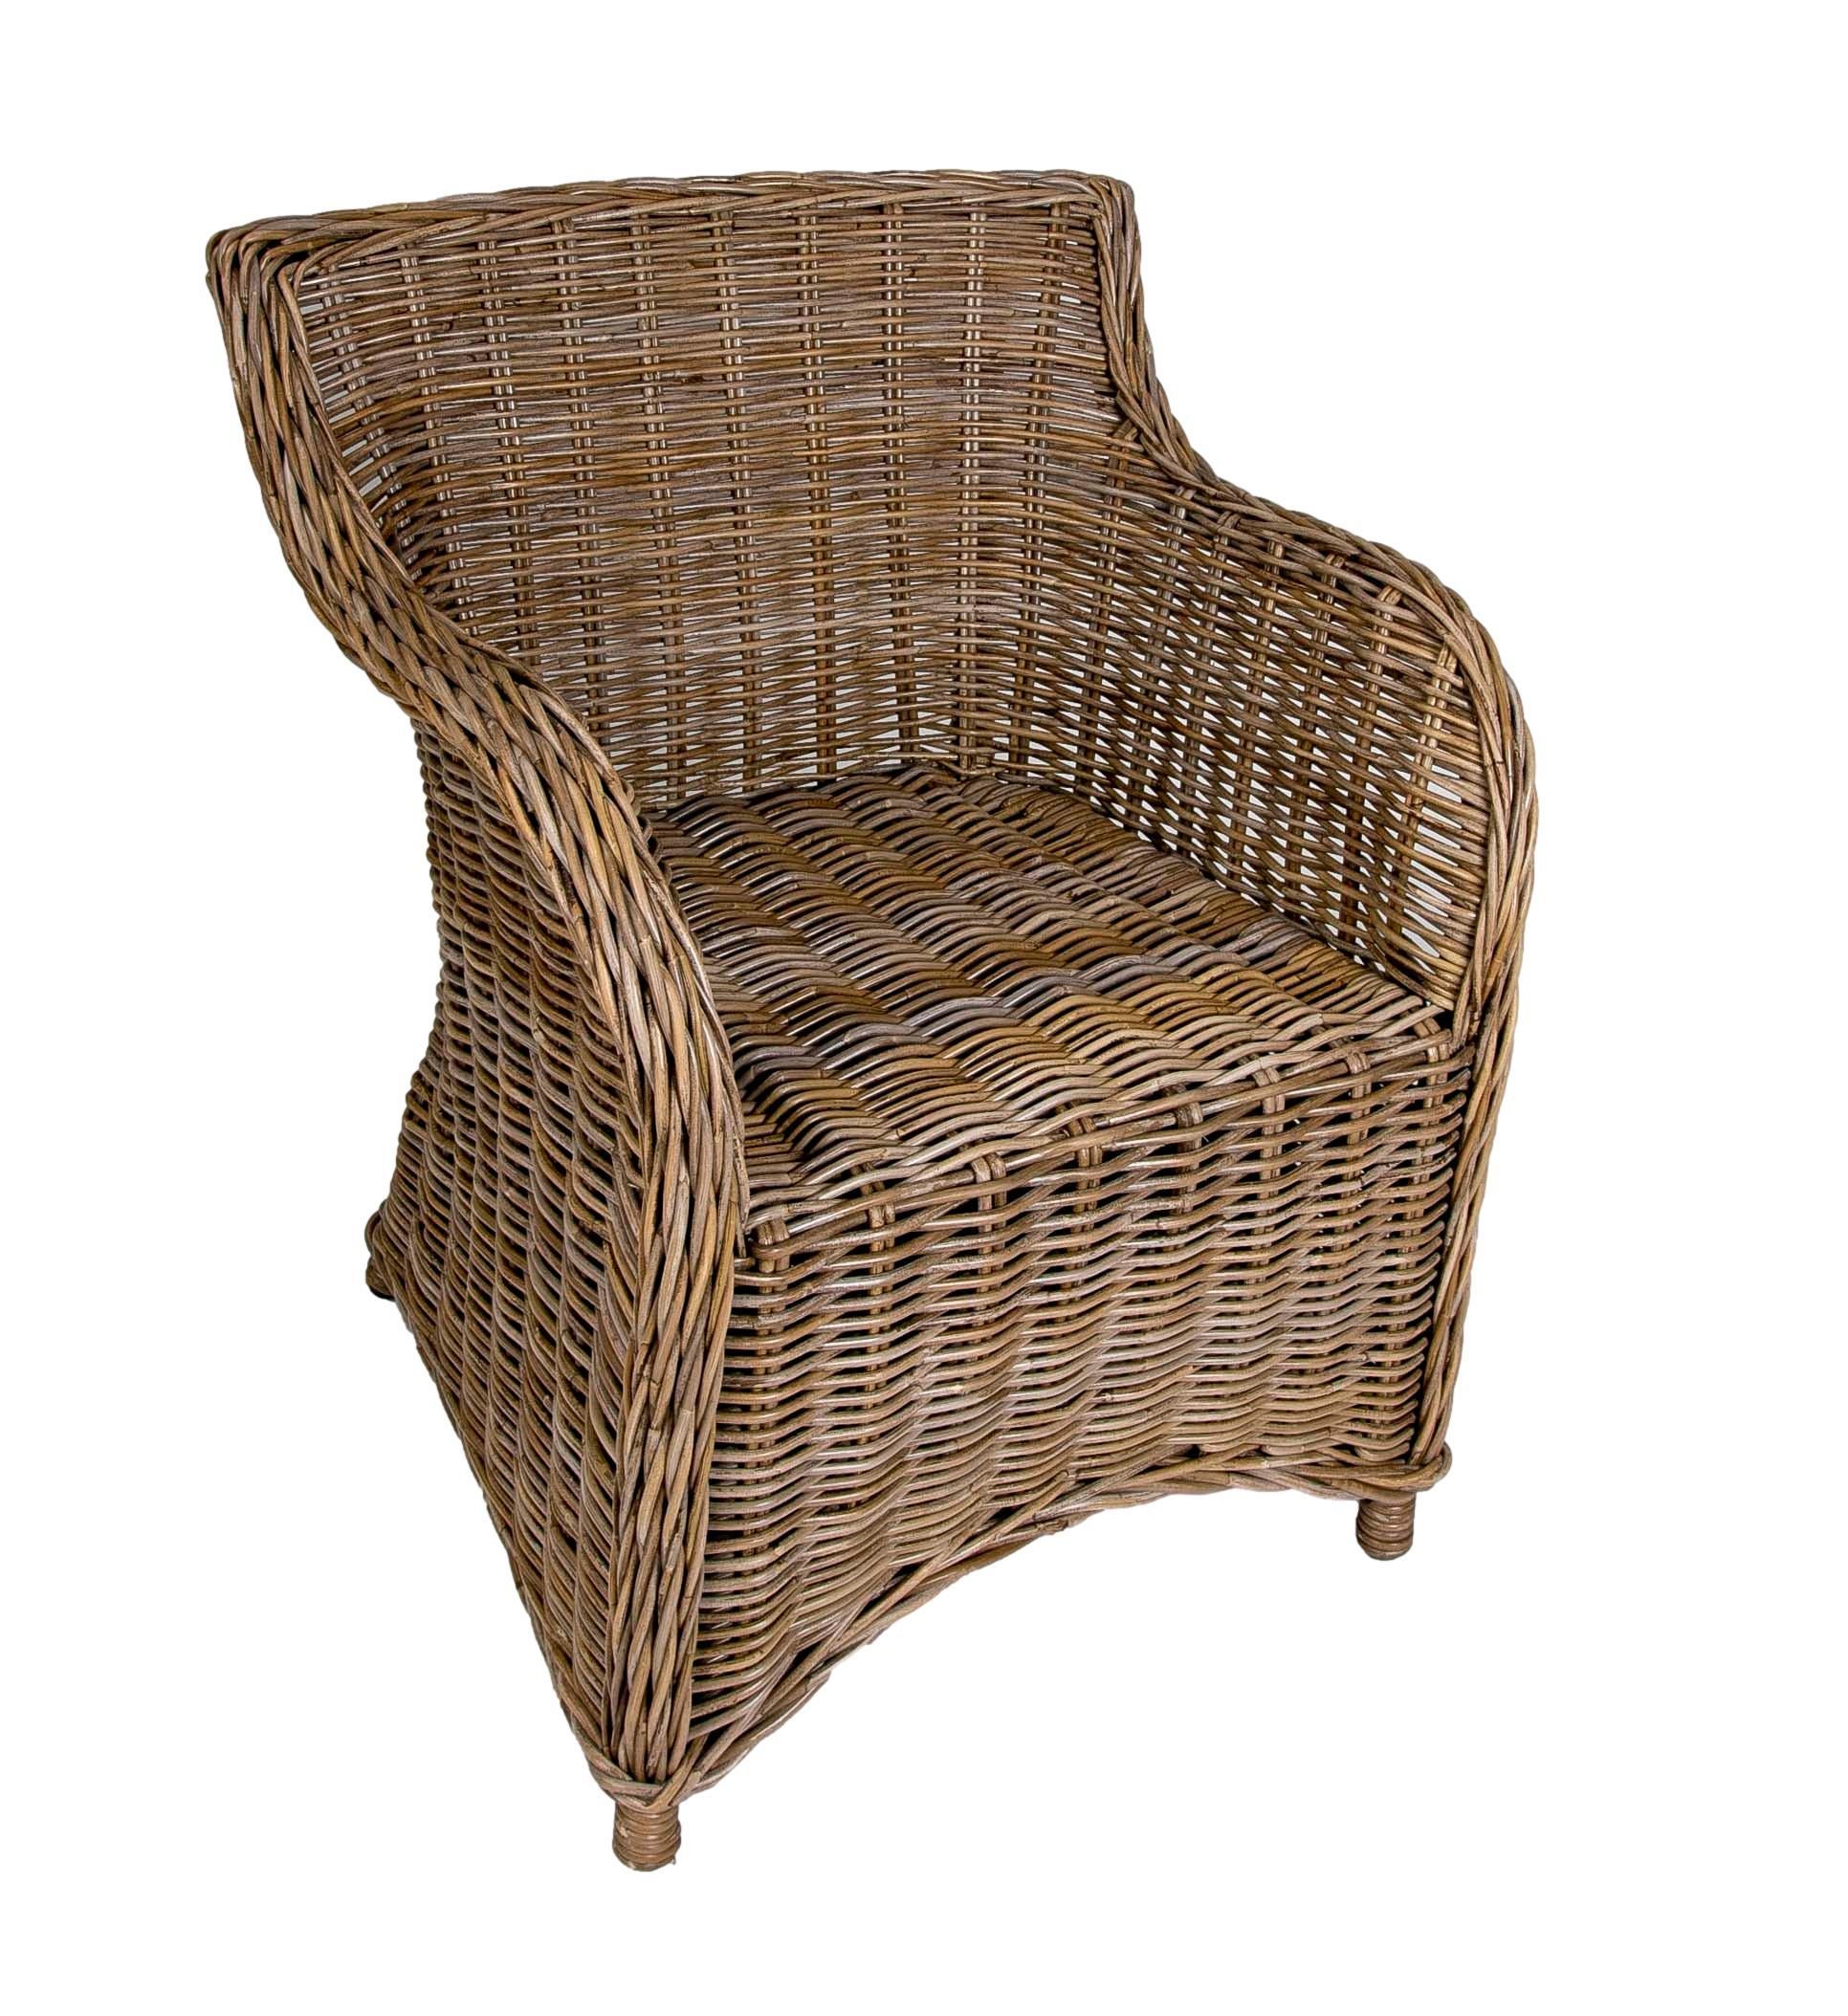  Rattan Garden Chair with Cushion in Greyish Tone In Good Condition For Sale In Marbella, ES